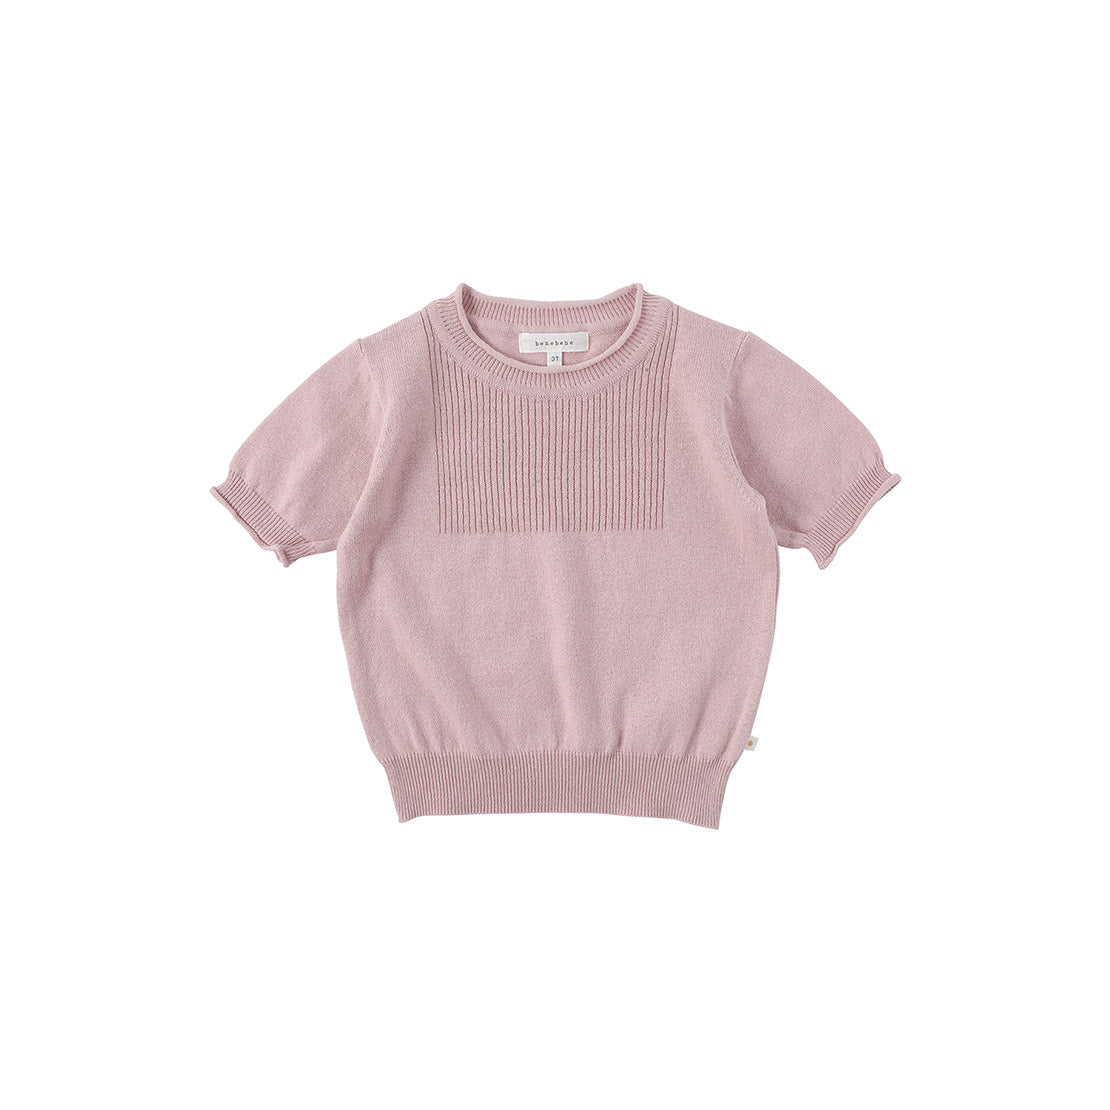 Cotton Curly Knit T-Shirt Pink